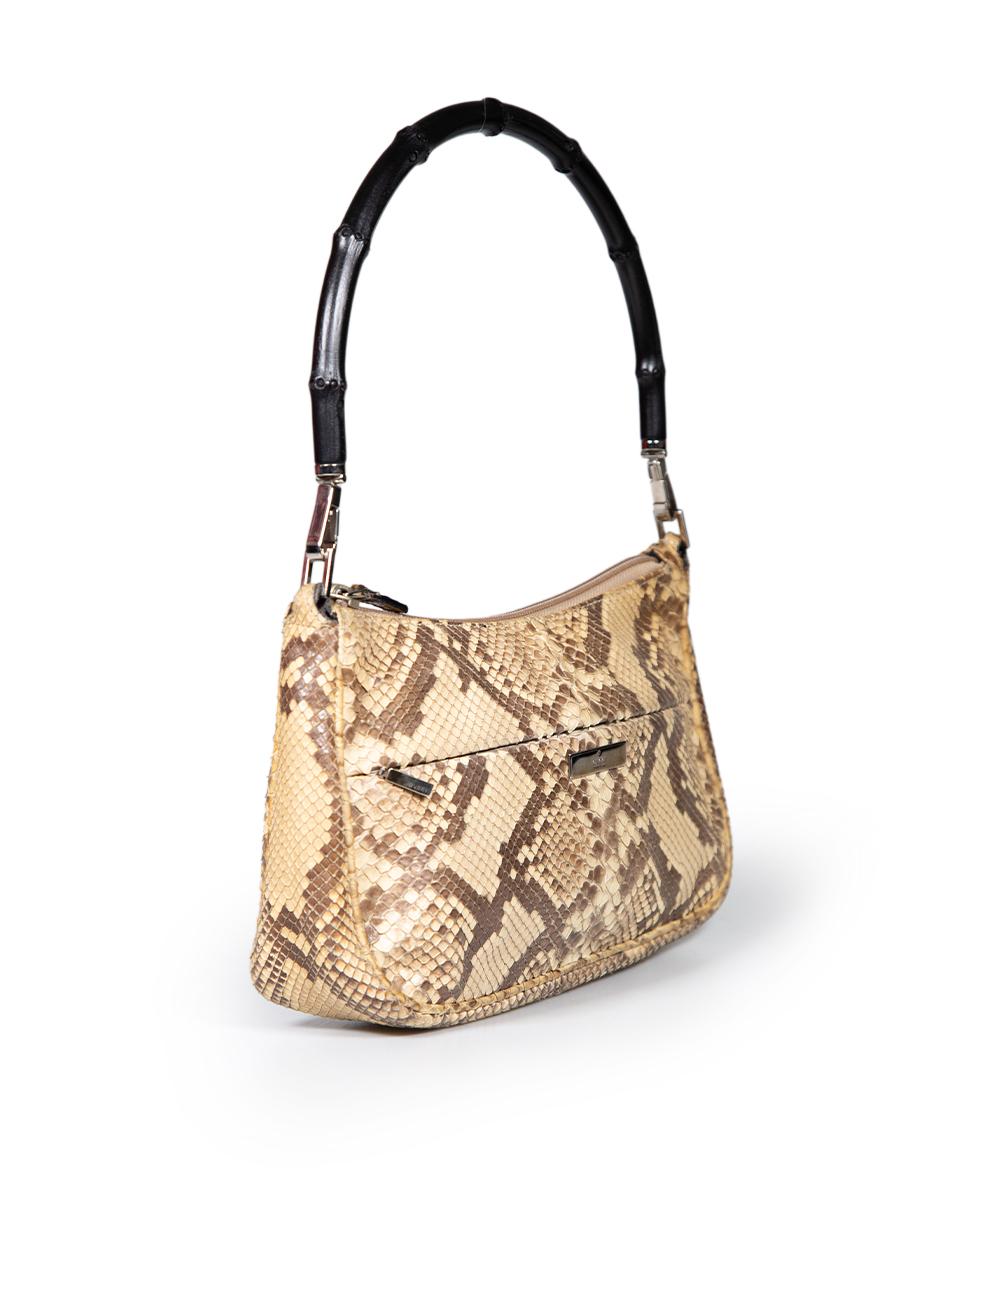 CONDITION is Very good. Minimal wear to bag is evident. Minimal wear to handle bases and general structure of bag on this used Gucci designer resale item. This item comes with original dust bag.
 
 
 
 Details
 
 
 Beige
 
 Snakeskin
 
 Medium top